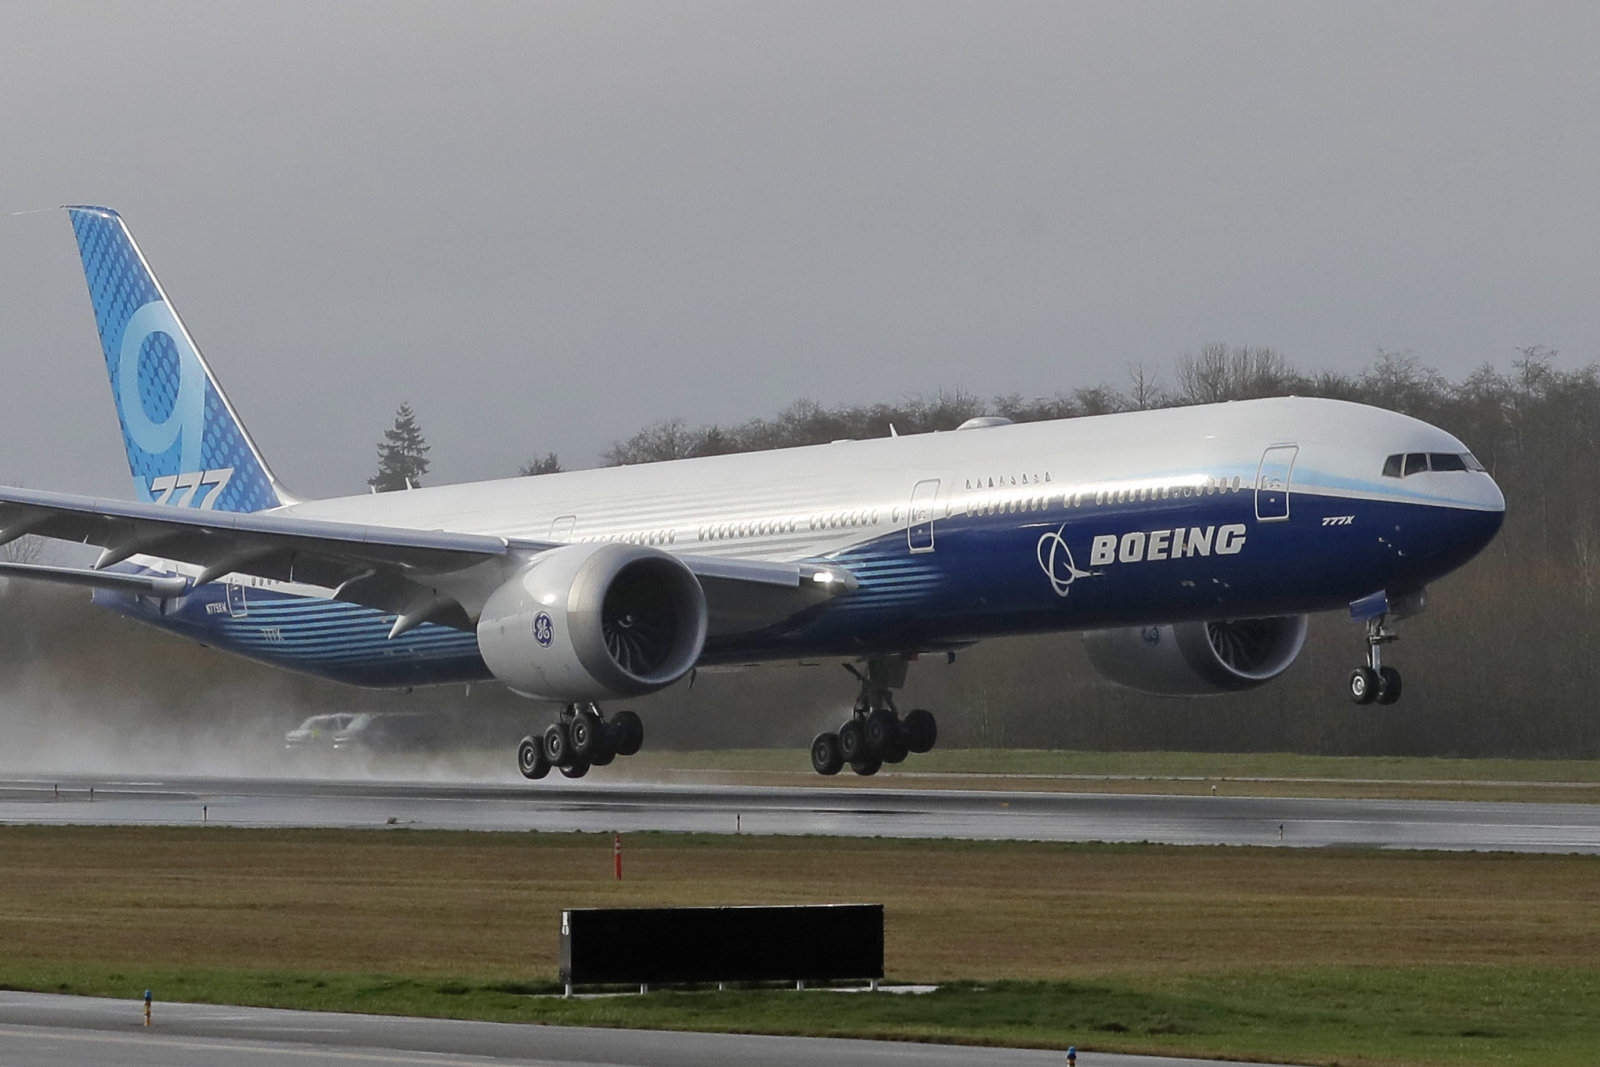 Boeing completes test flight for the world's largest twin-engine jet | DeviceDaily.com